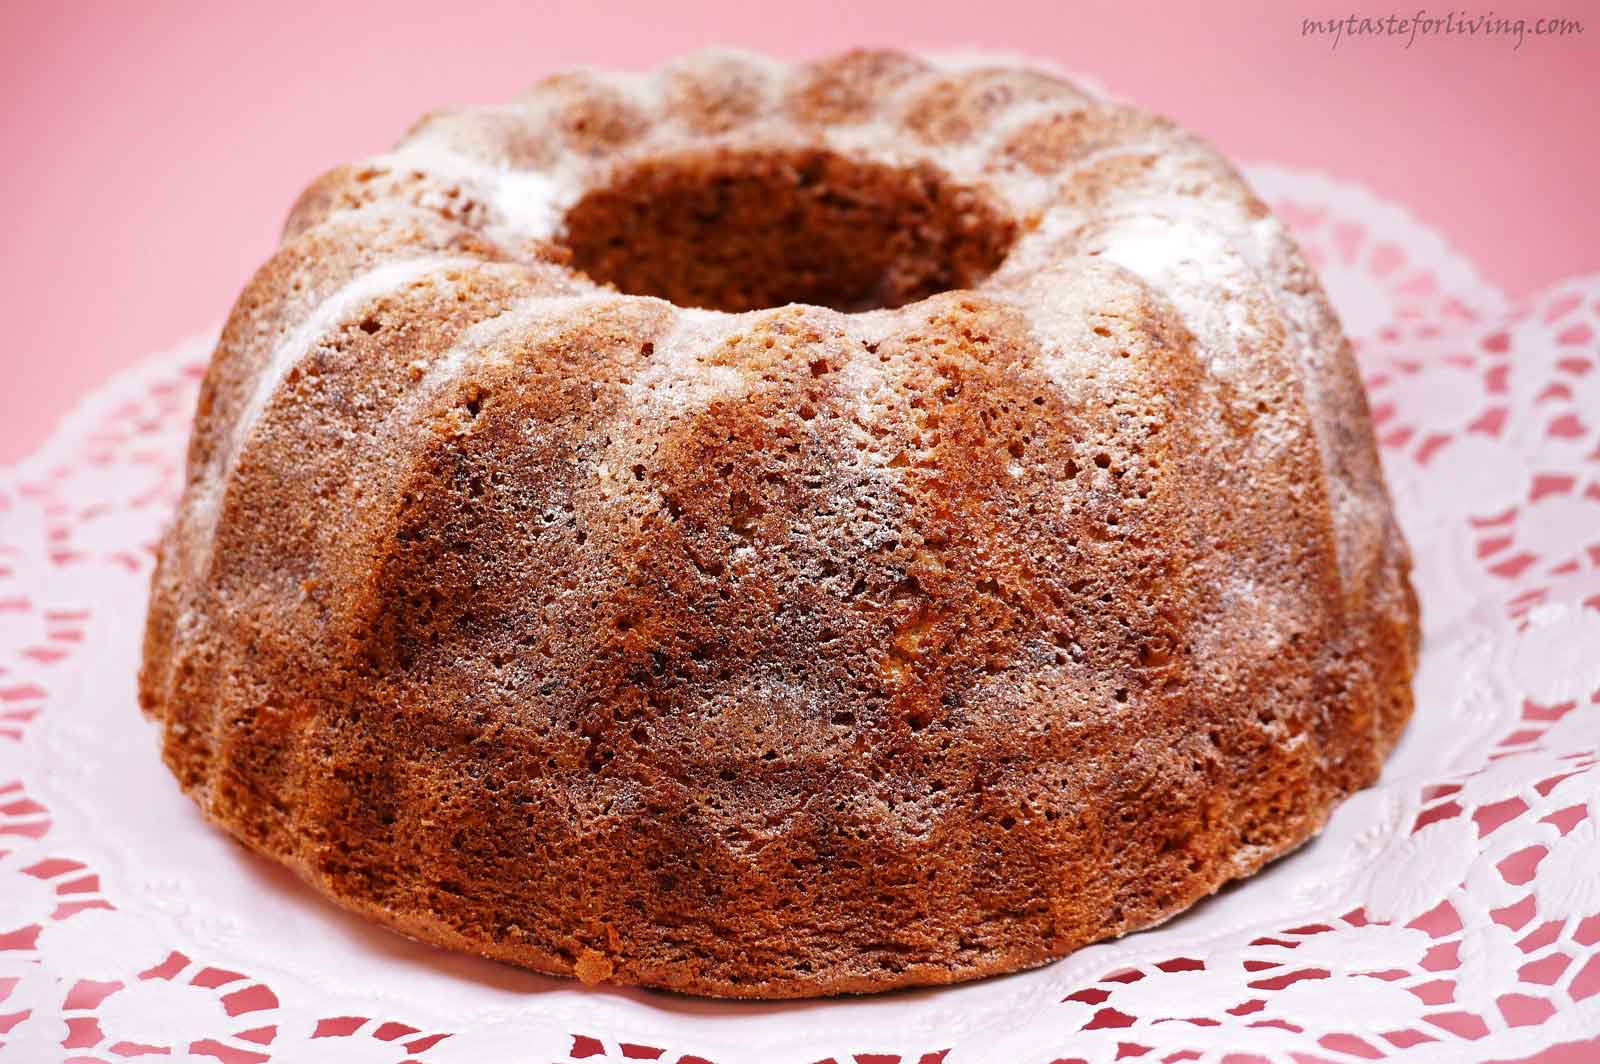 Our favorite fluffy cake made with apples, walnuts and wholemeal einkorn flour. 